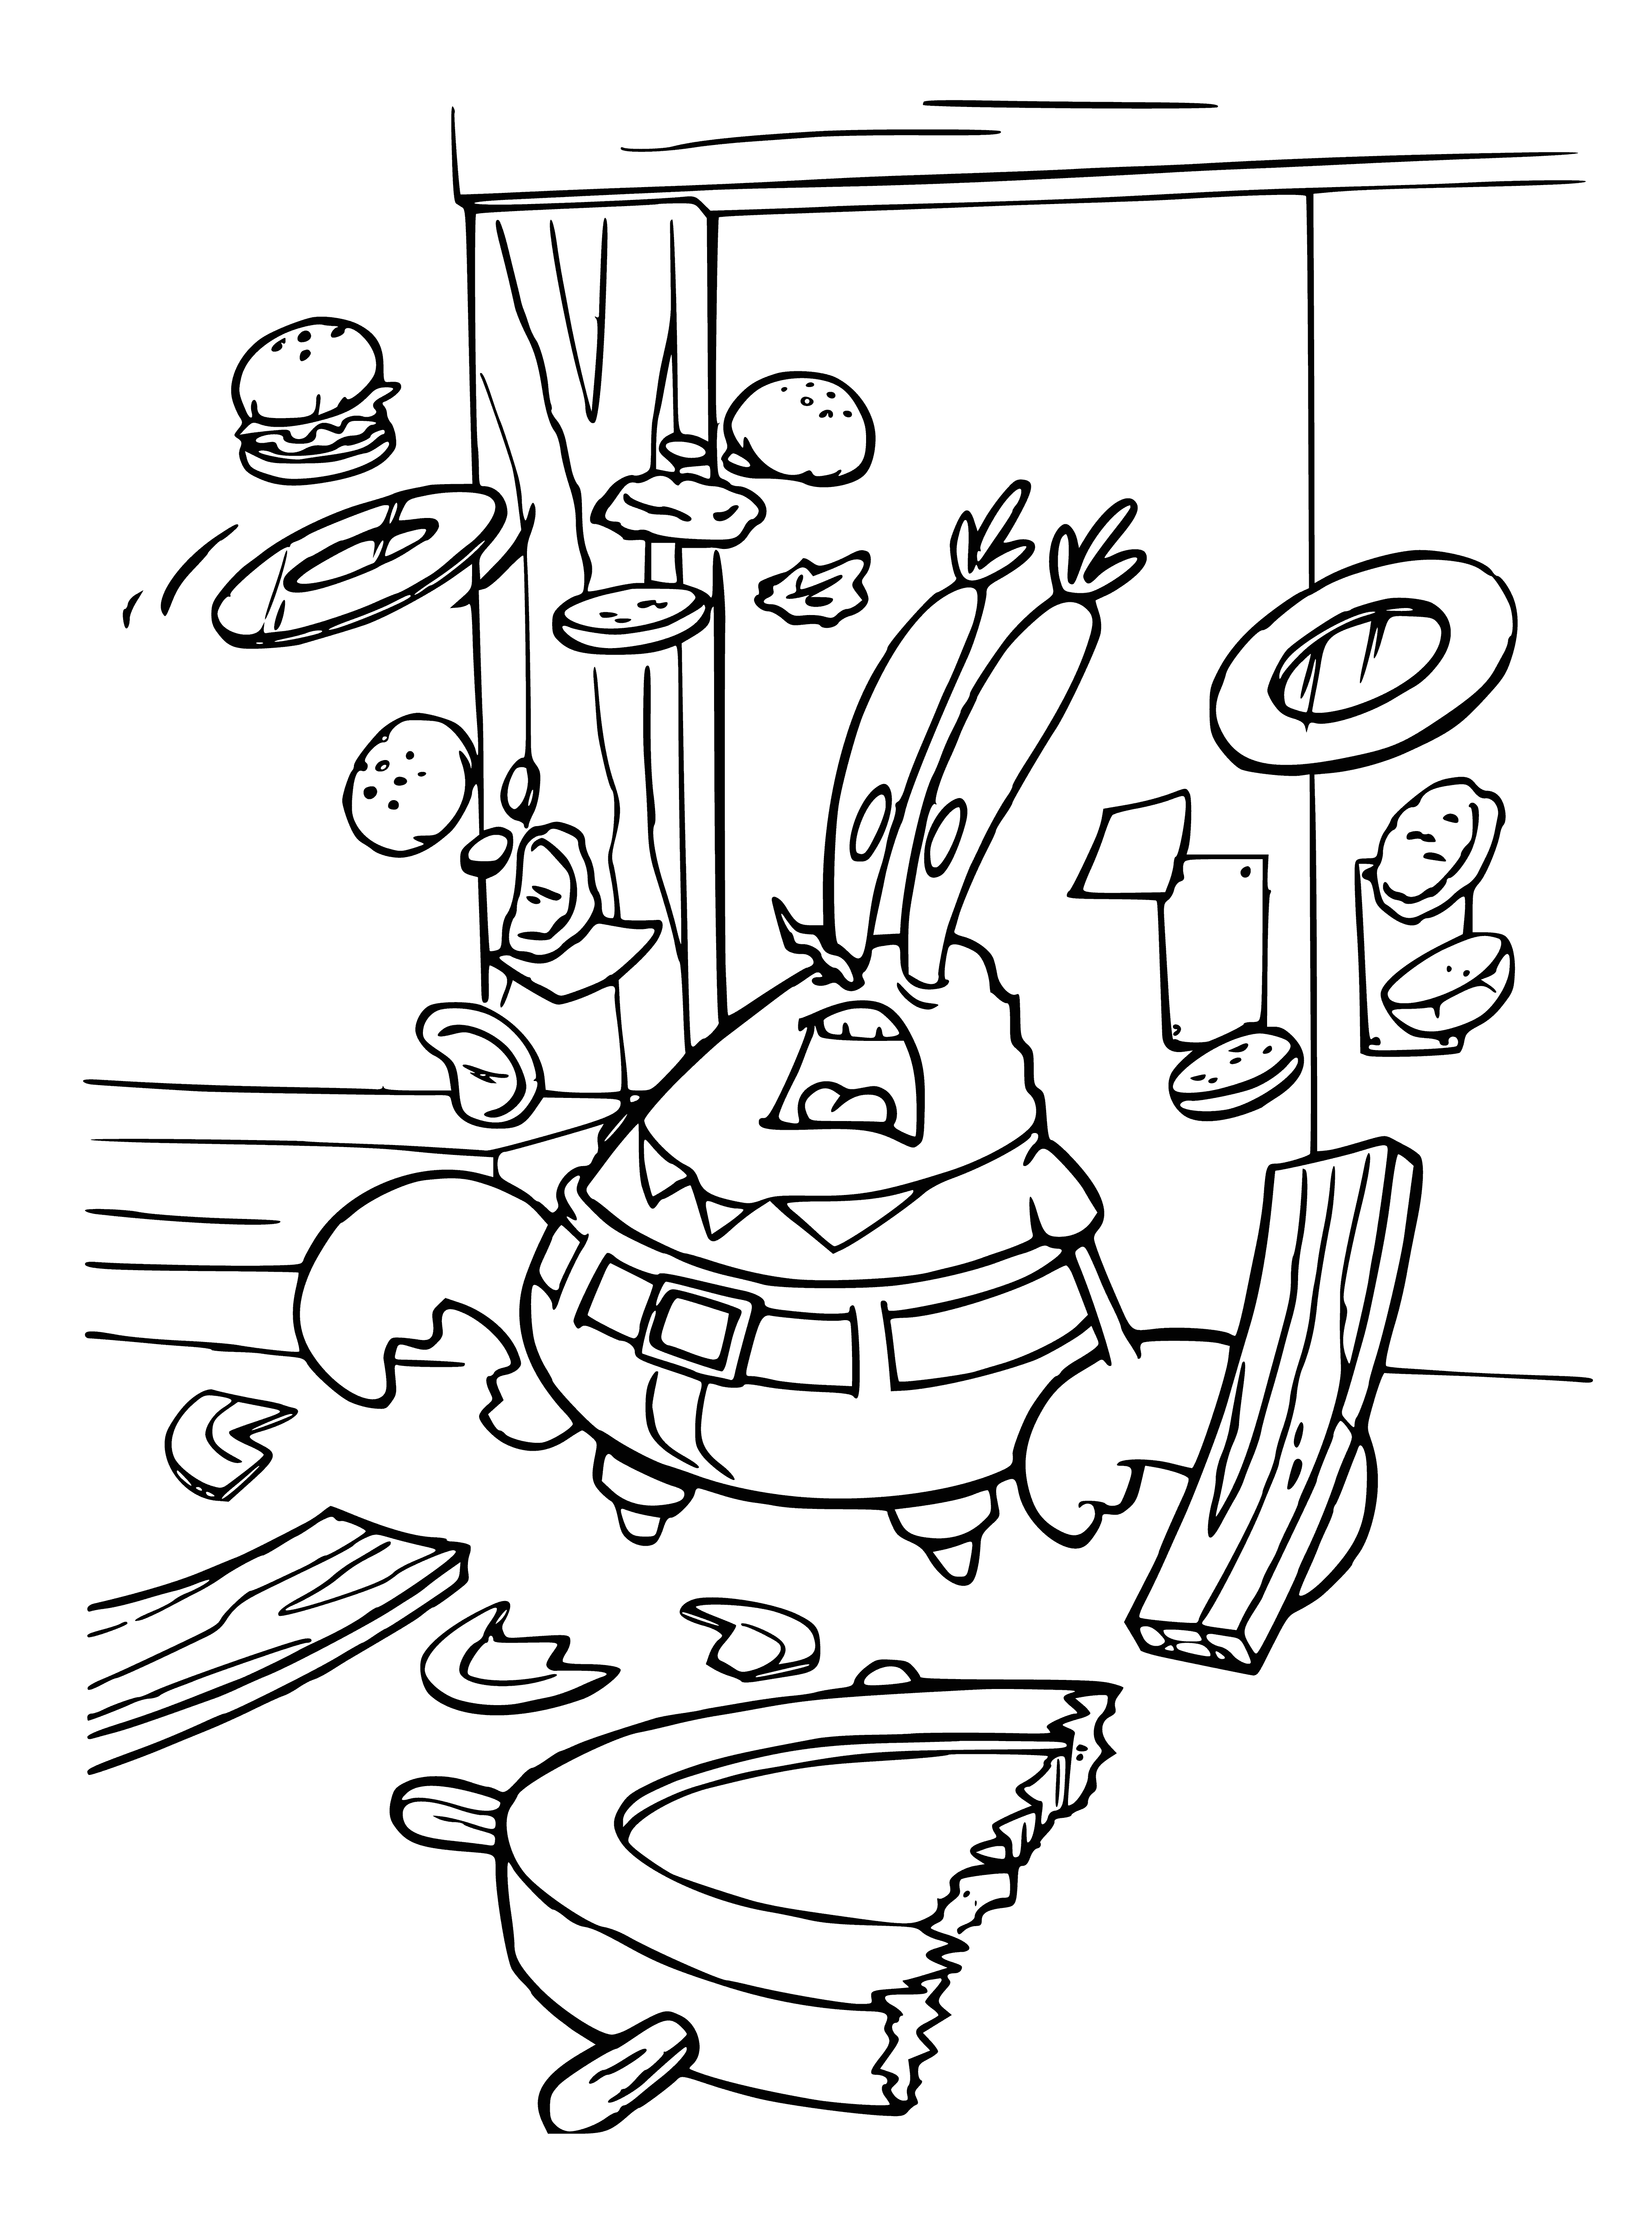 coloring page: SpongeBob screams in surprise as an explosion appears in the background! 3 fingers point up near his head. #spongebobsquarepants